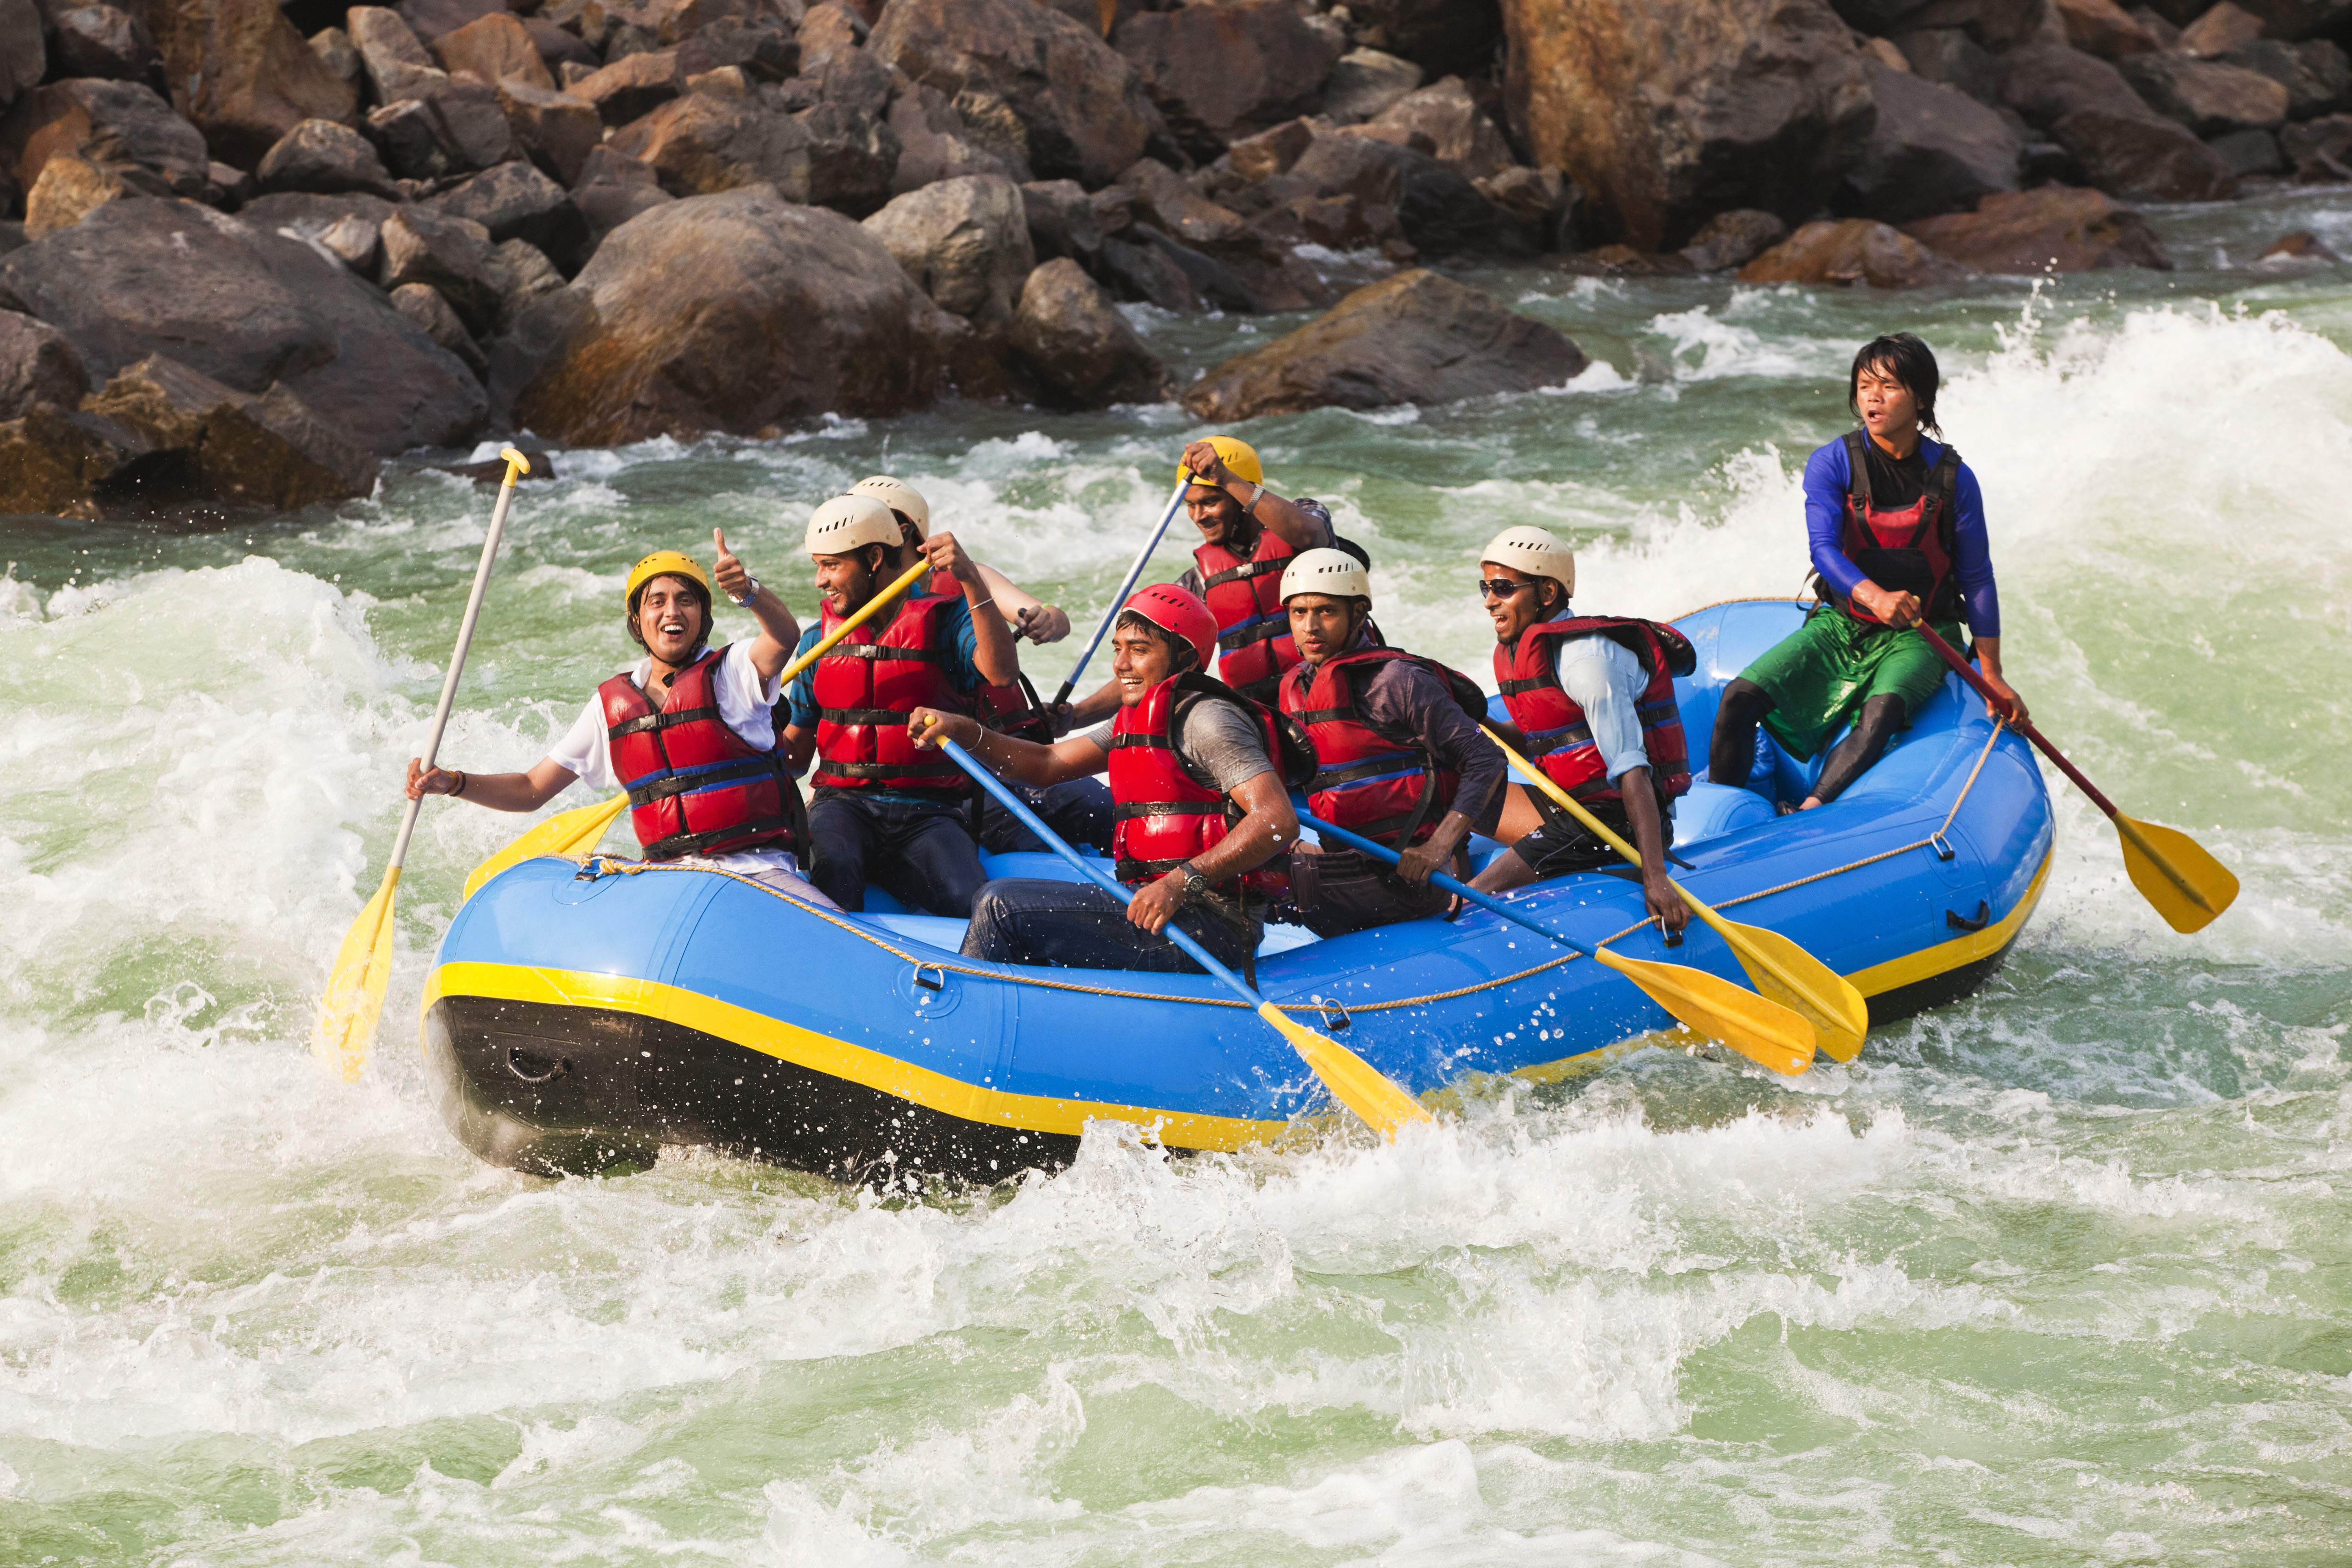 Group of people rafting in Ganges River, Rishikesh, Uttarakhand, India. (Photo by: Exotica.im/UIG via Getty Images)